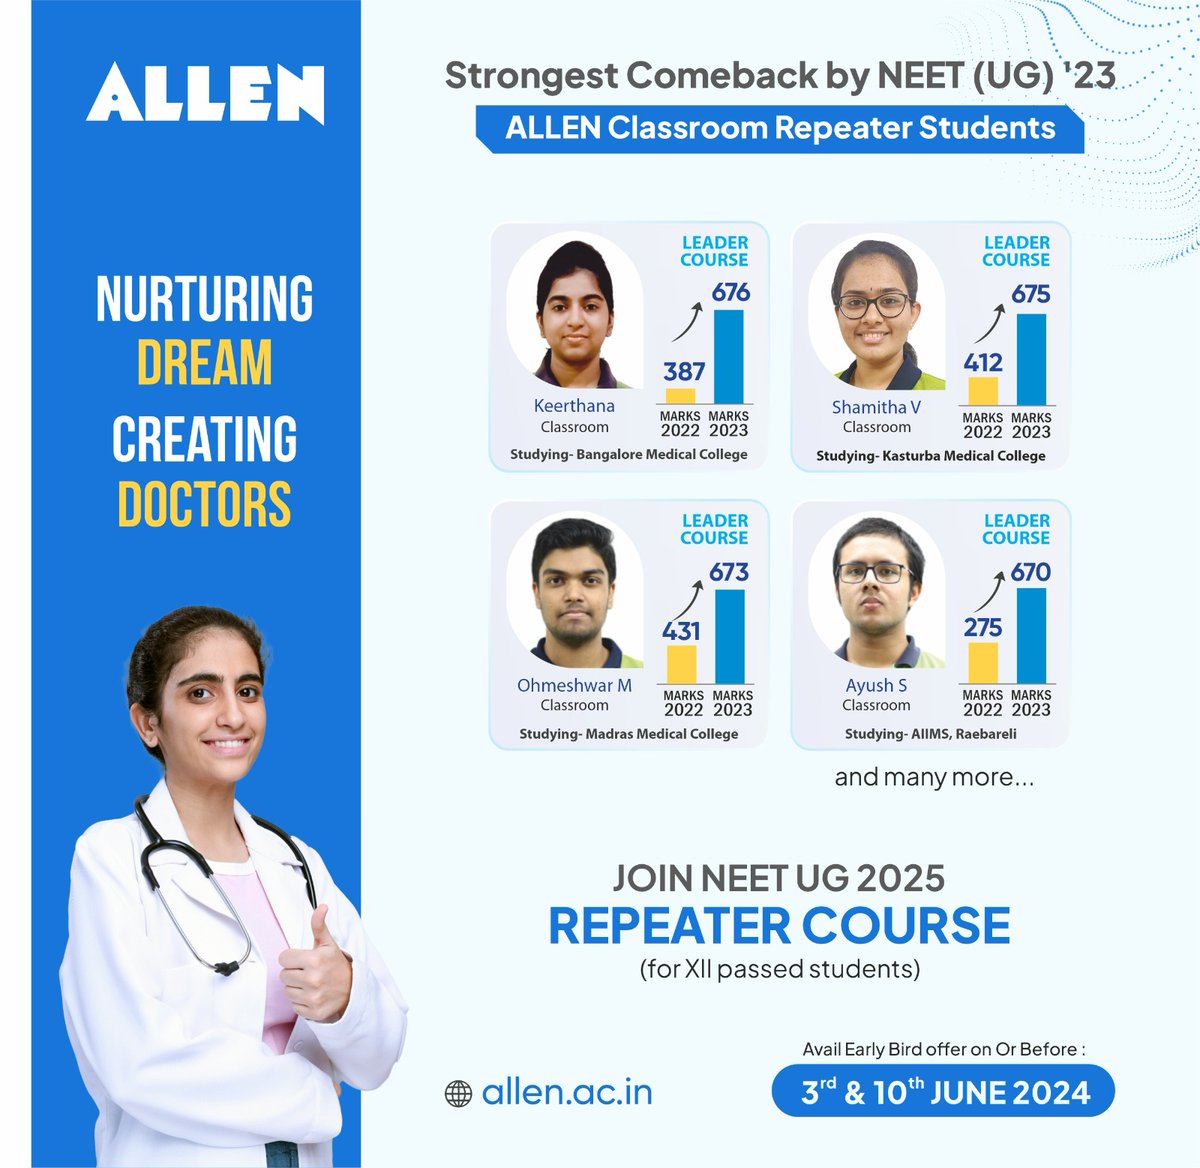 💪 Are you ready to make a strong comeback and crack #NEETUG in your next attempt?

📢 Join ALLEN's #NEETUG2025 Repeater Course and be a part of the success story.

📌 Also Avail early bird offer 

 #ALLENSouthIndia #MedicalAspirants #EarlyBirdOffer #DreamBig #ALLENTamilNadu